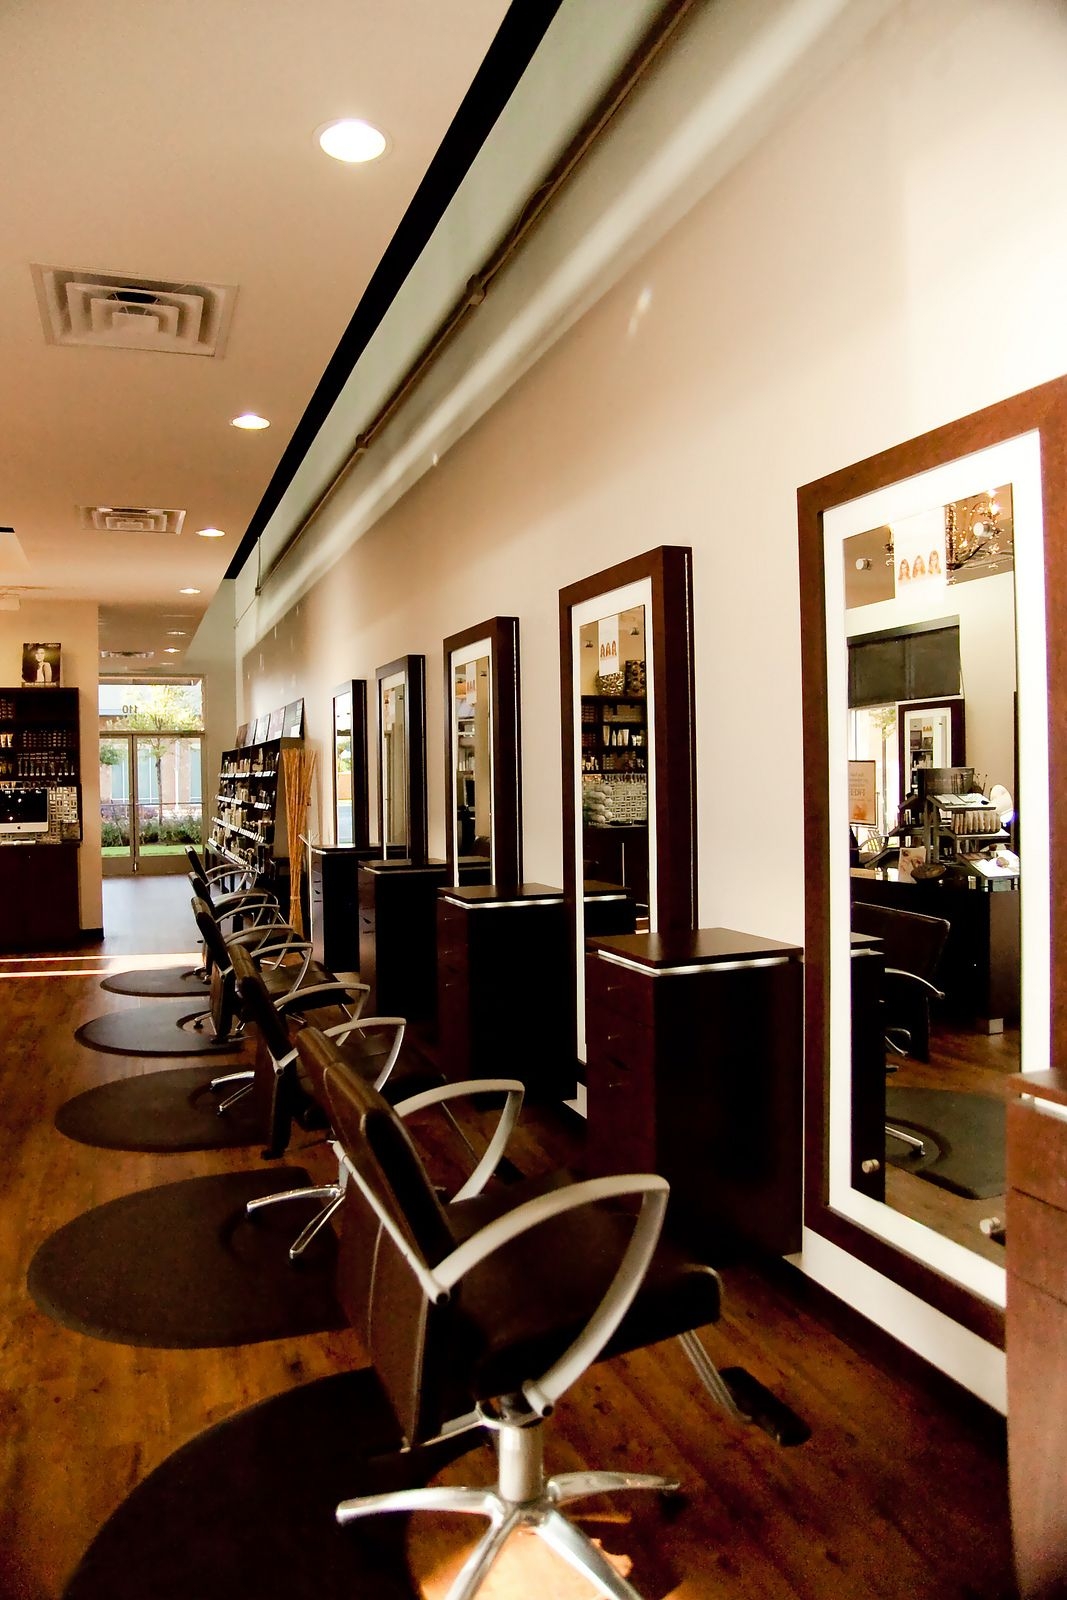 Tangerine salon you can get this same vibe with the